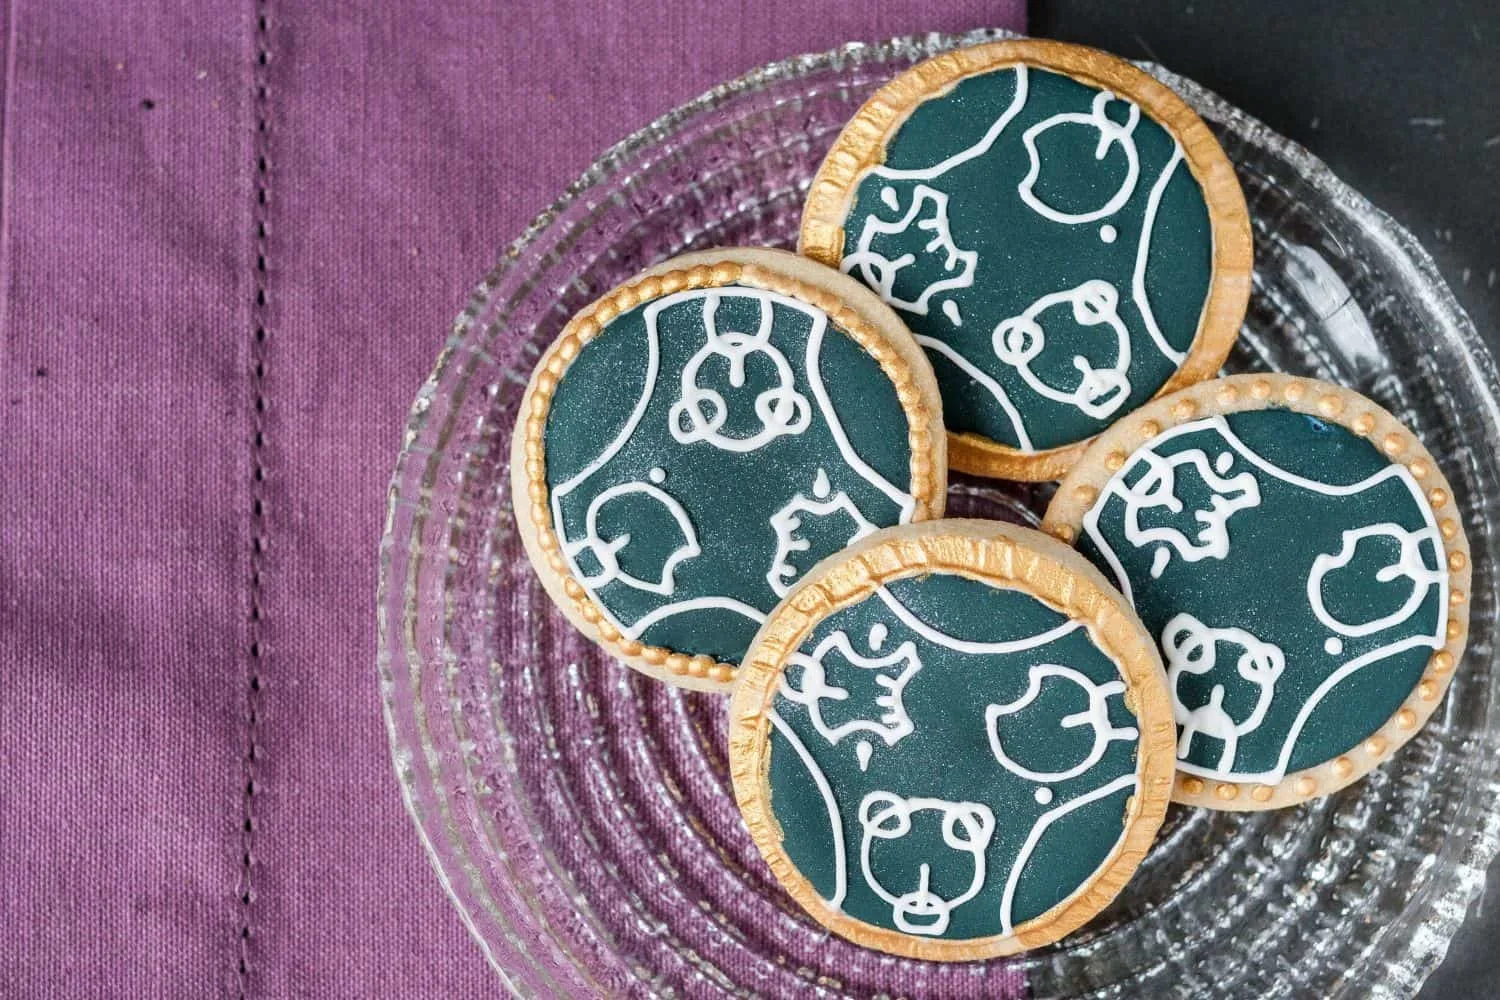 Doctor Who Wedding Cookies Tutorial - The perfect favor or dessert table addition for a Doctor Who wedding, customized with the couple's names in Gallifreyan. Get the tutorial on GoodieGodmother.com